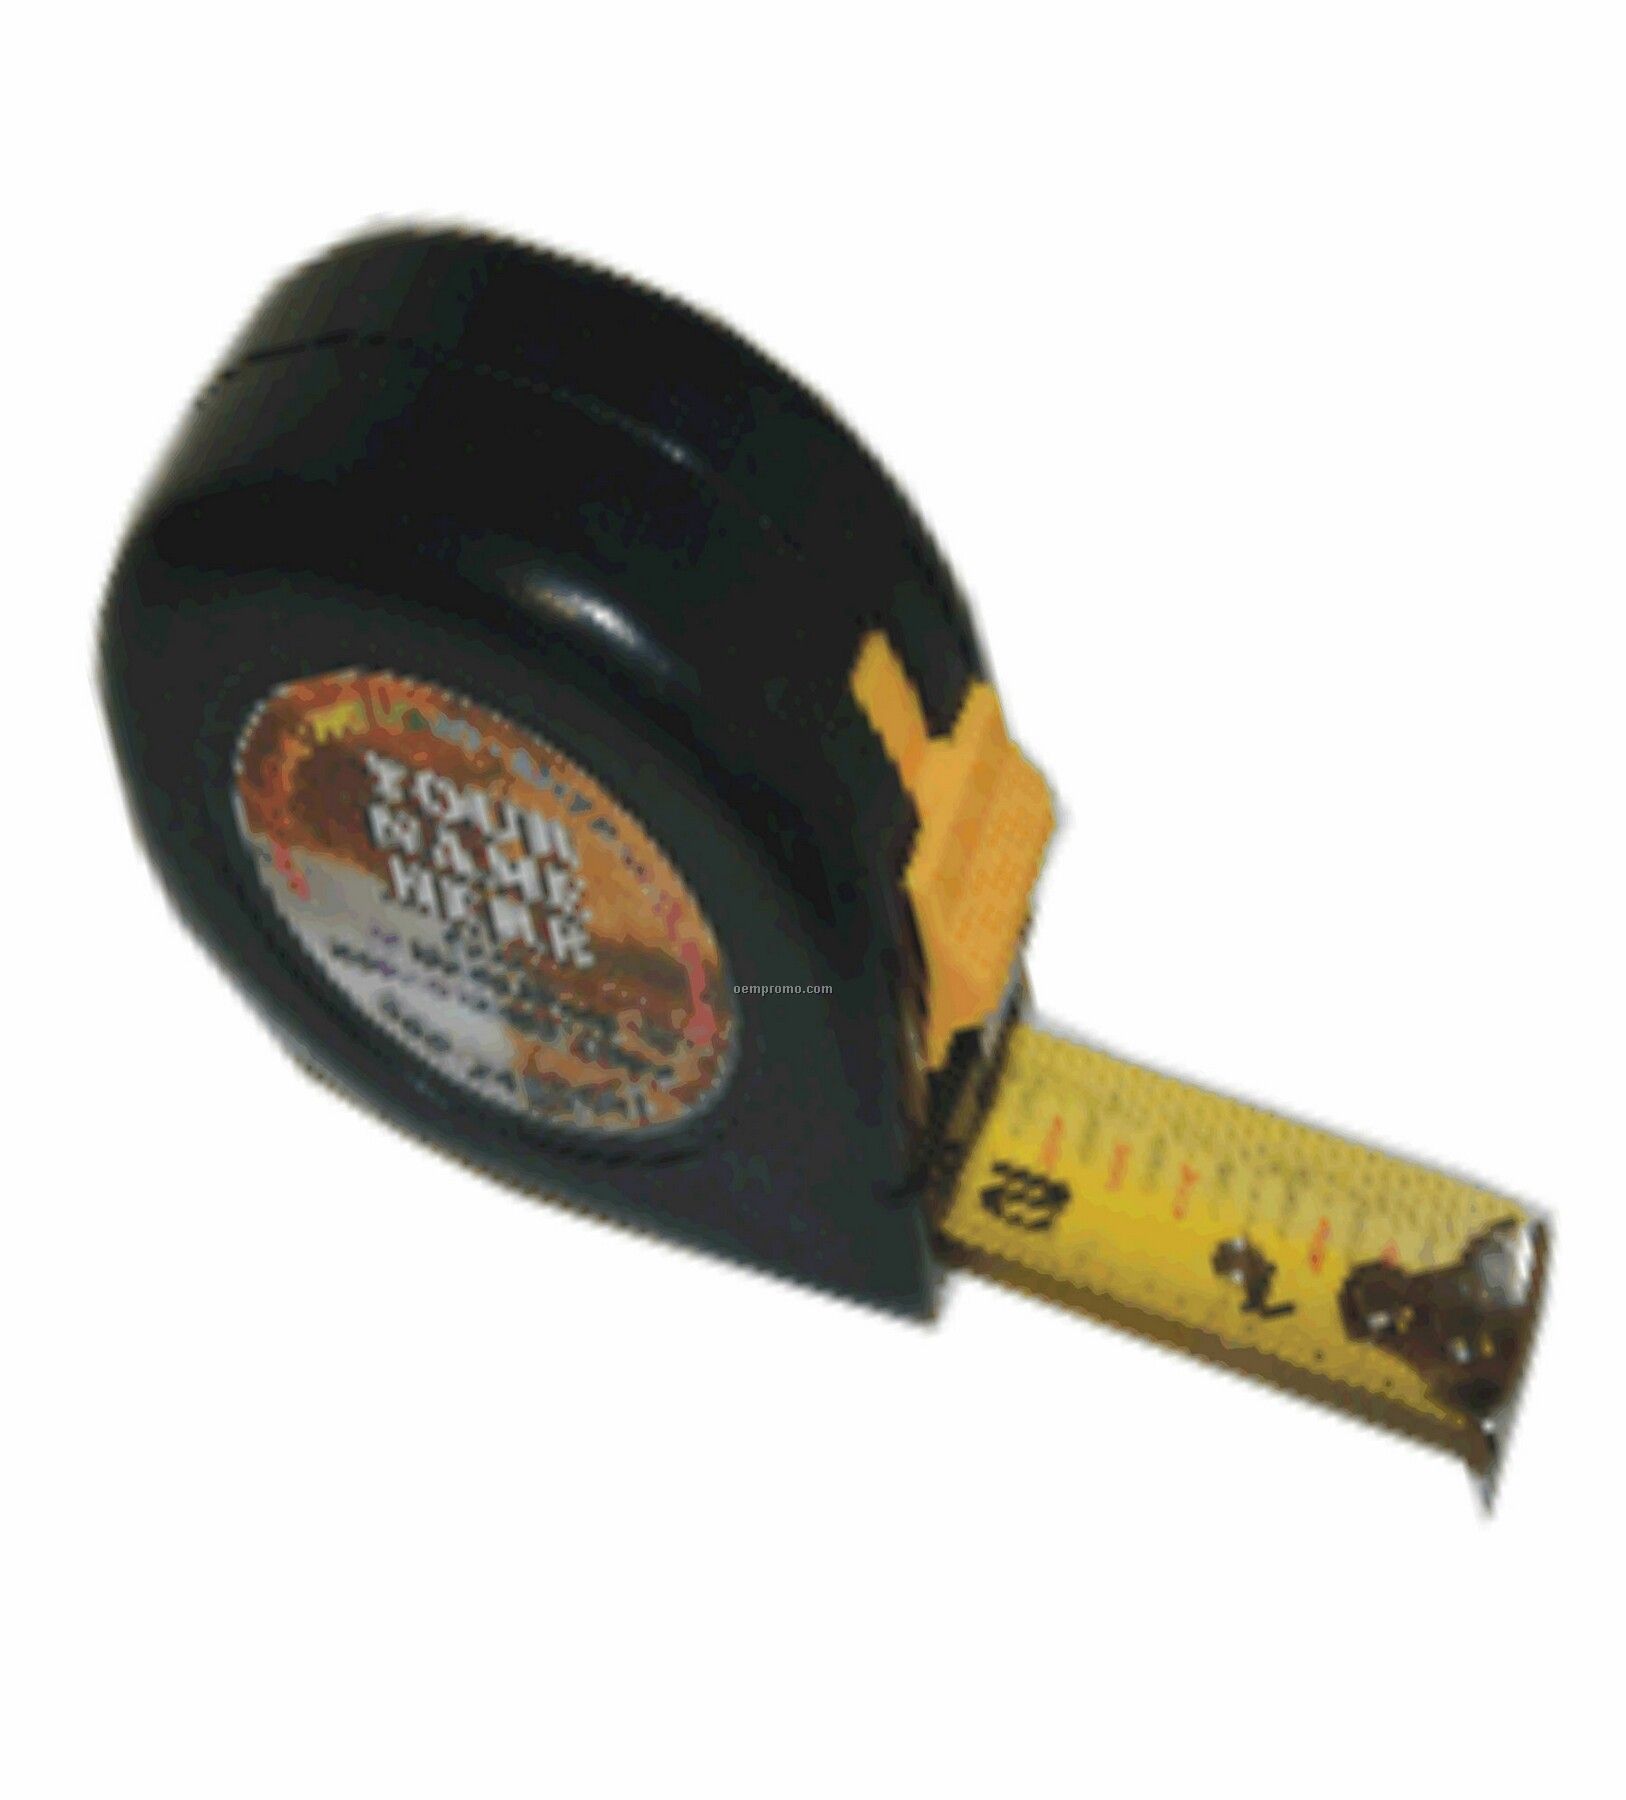 Heavy Duty Tape Measure With Solid ABS Resin Case (25' X 1")